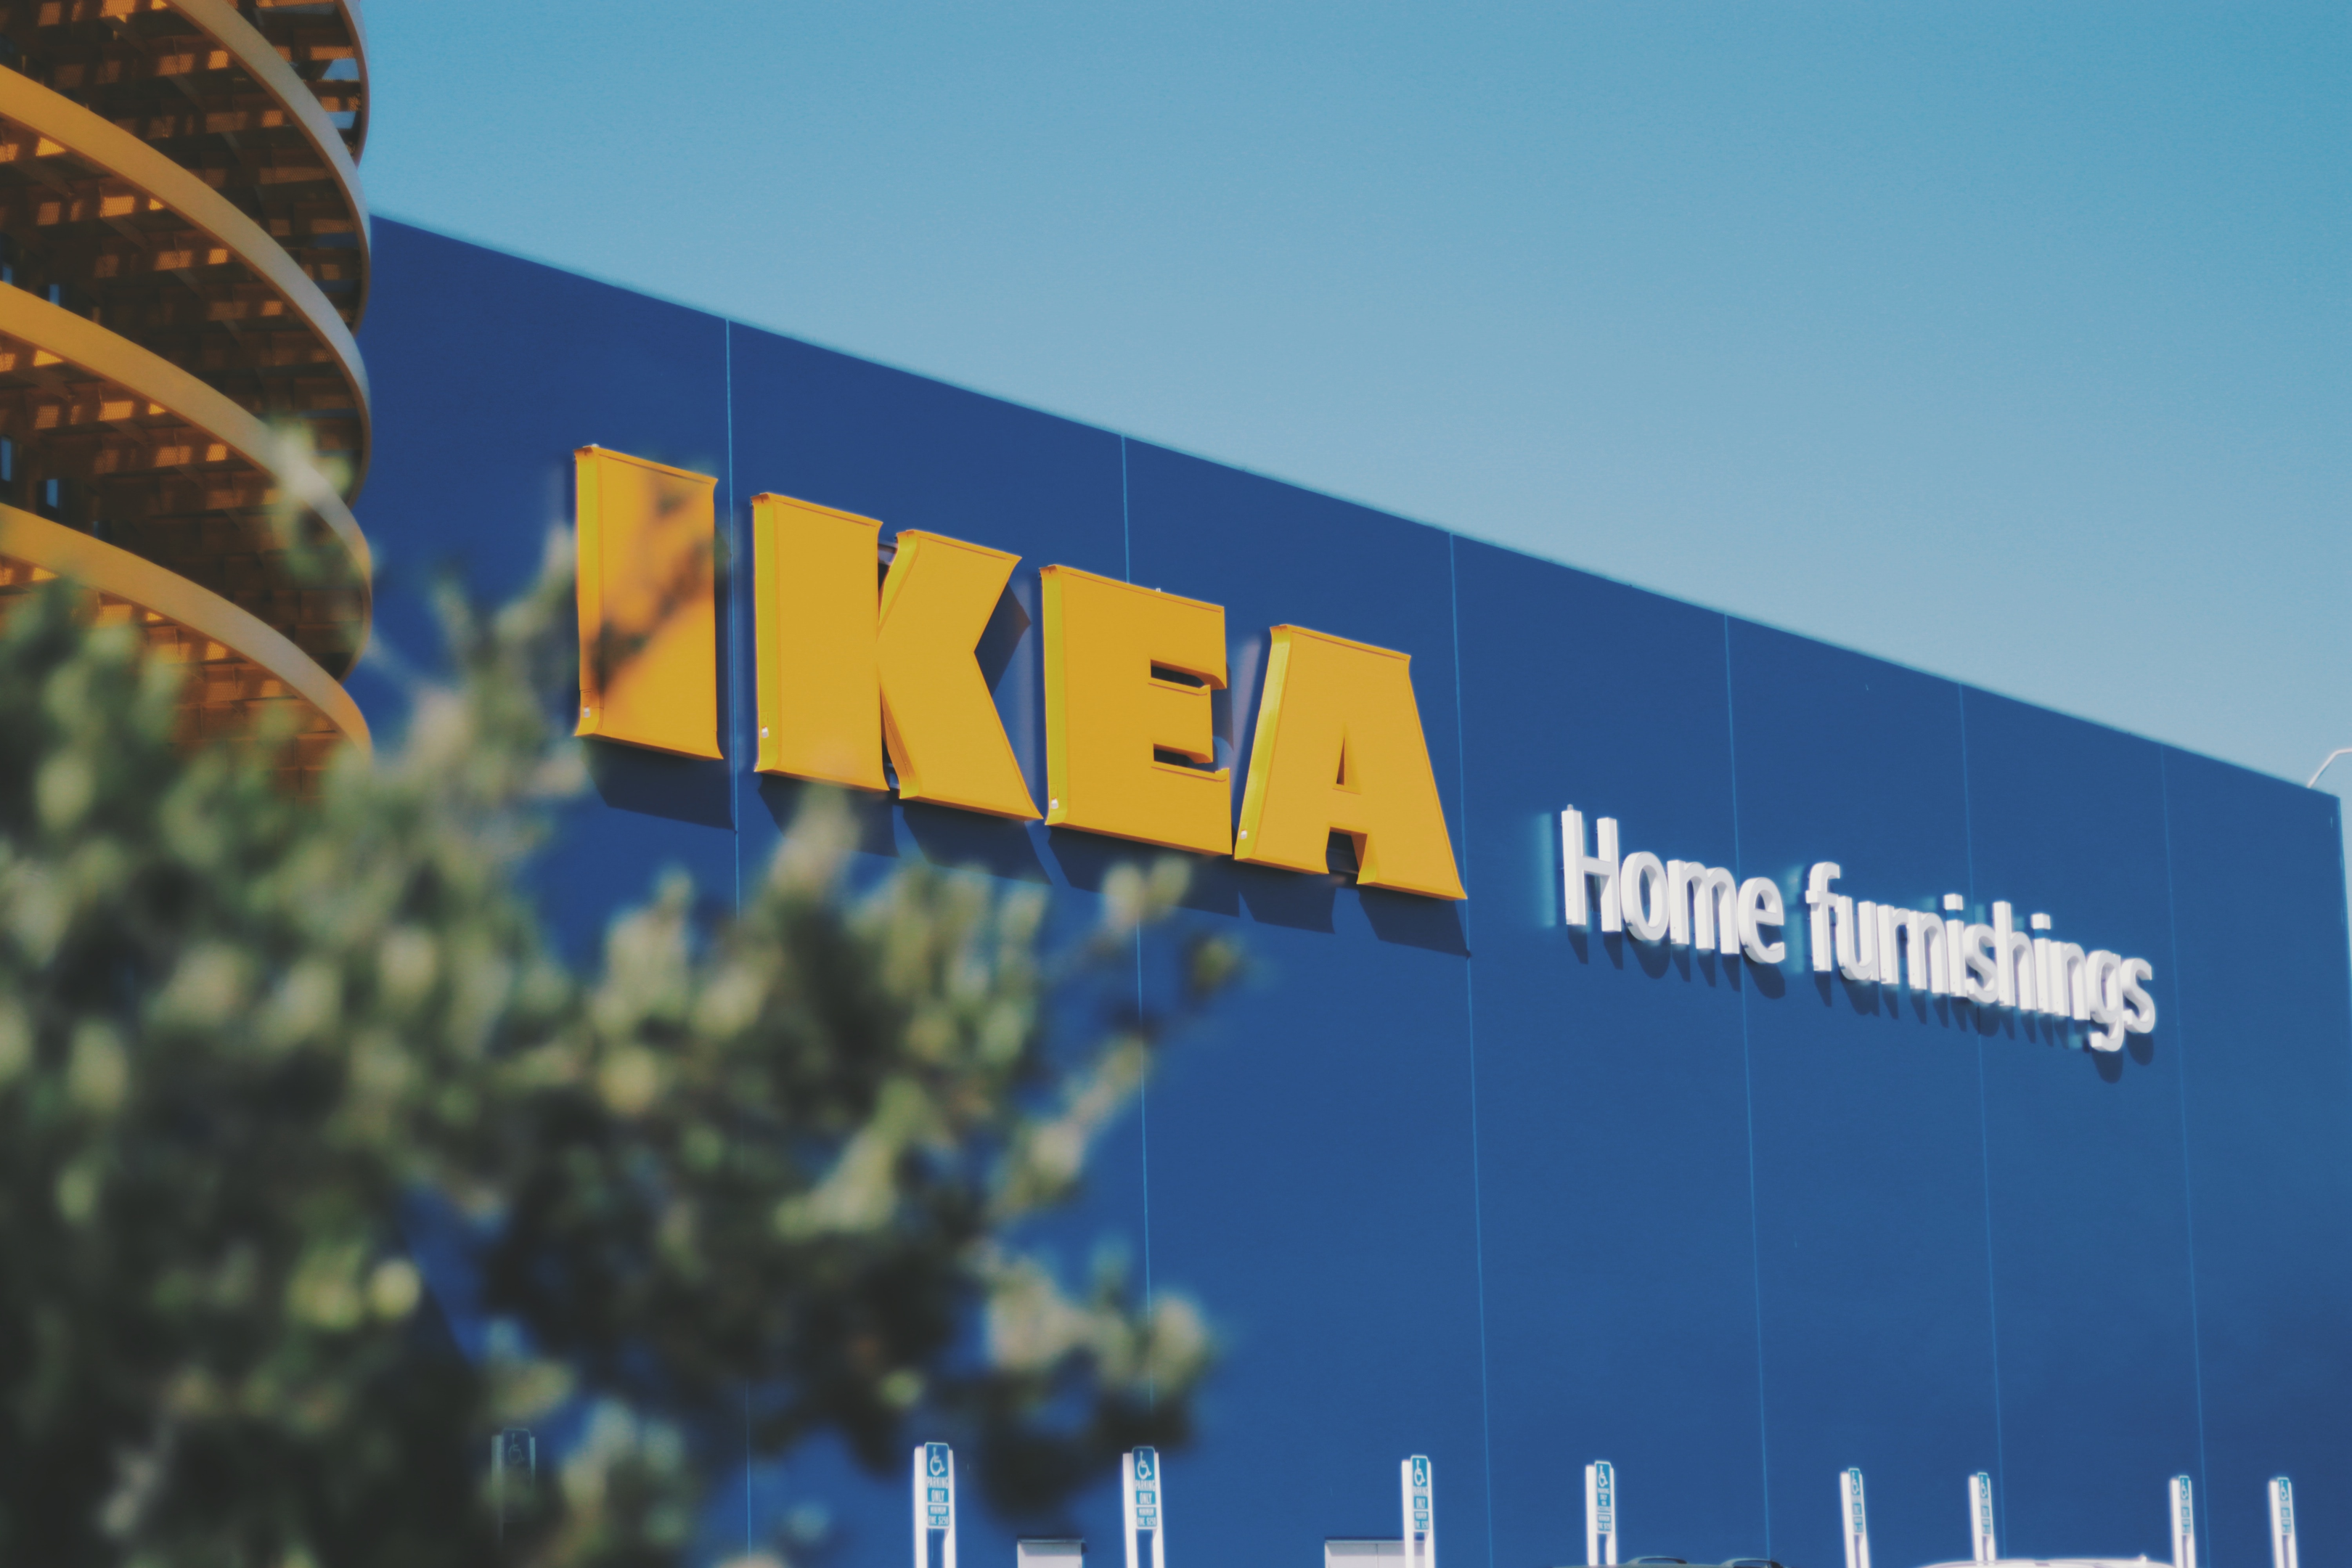 IKEA is one of the top home furnishings retailer in the world | Photo by Alexander Isreb from Pexels